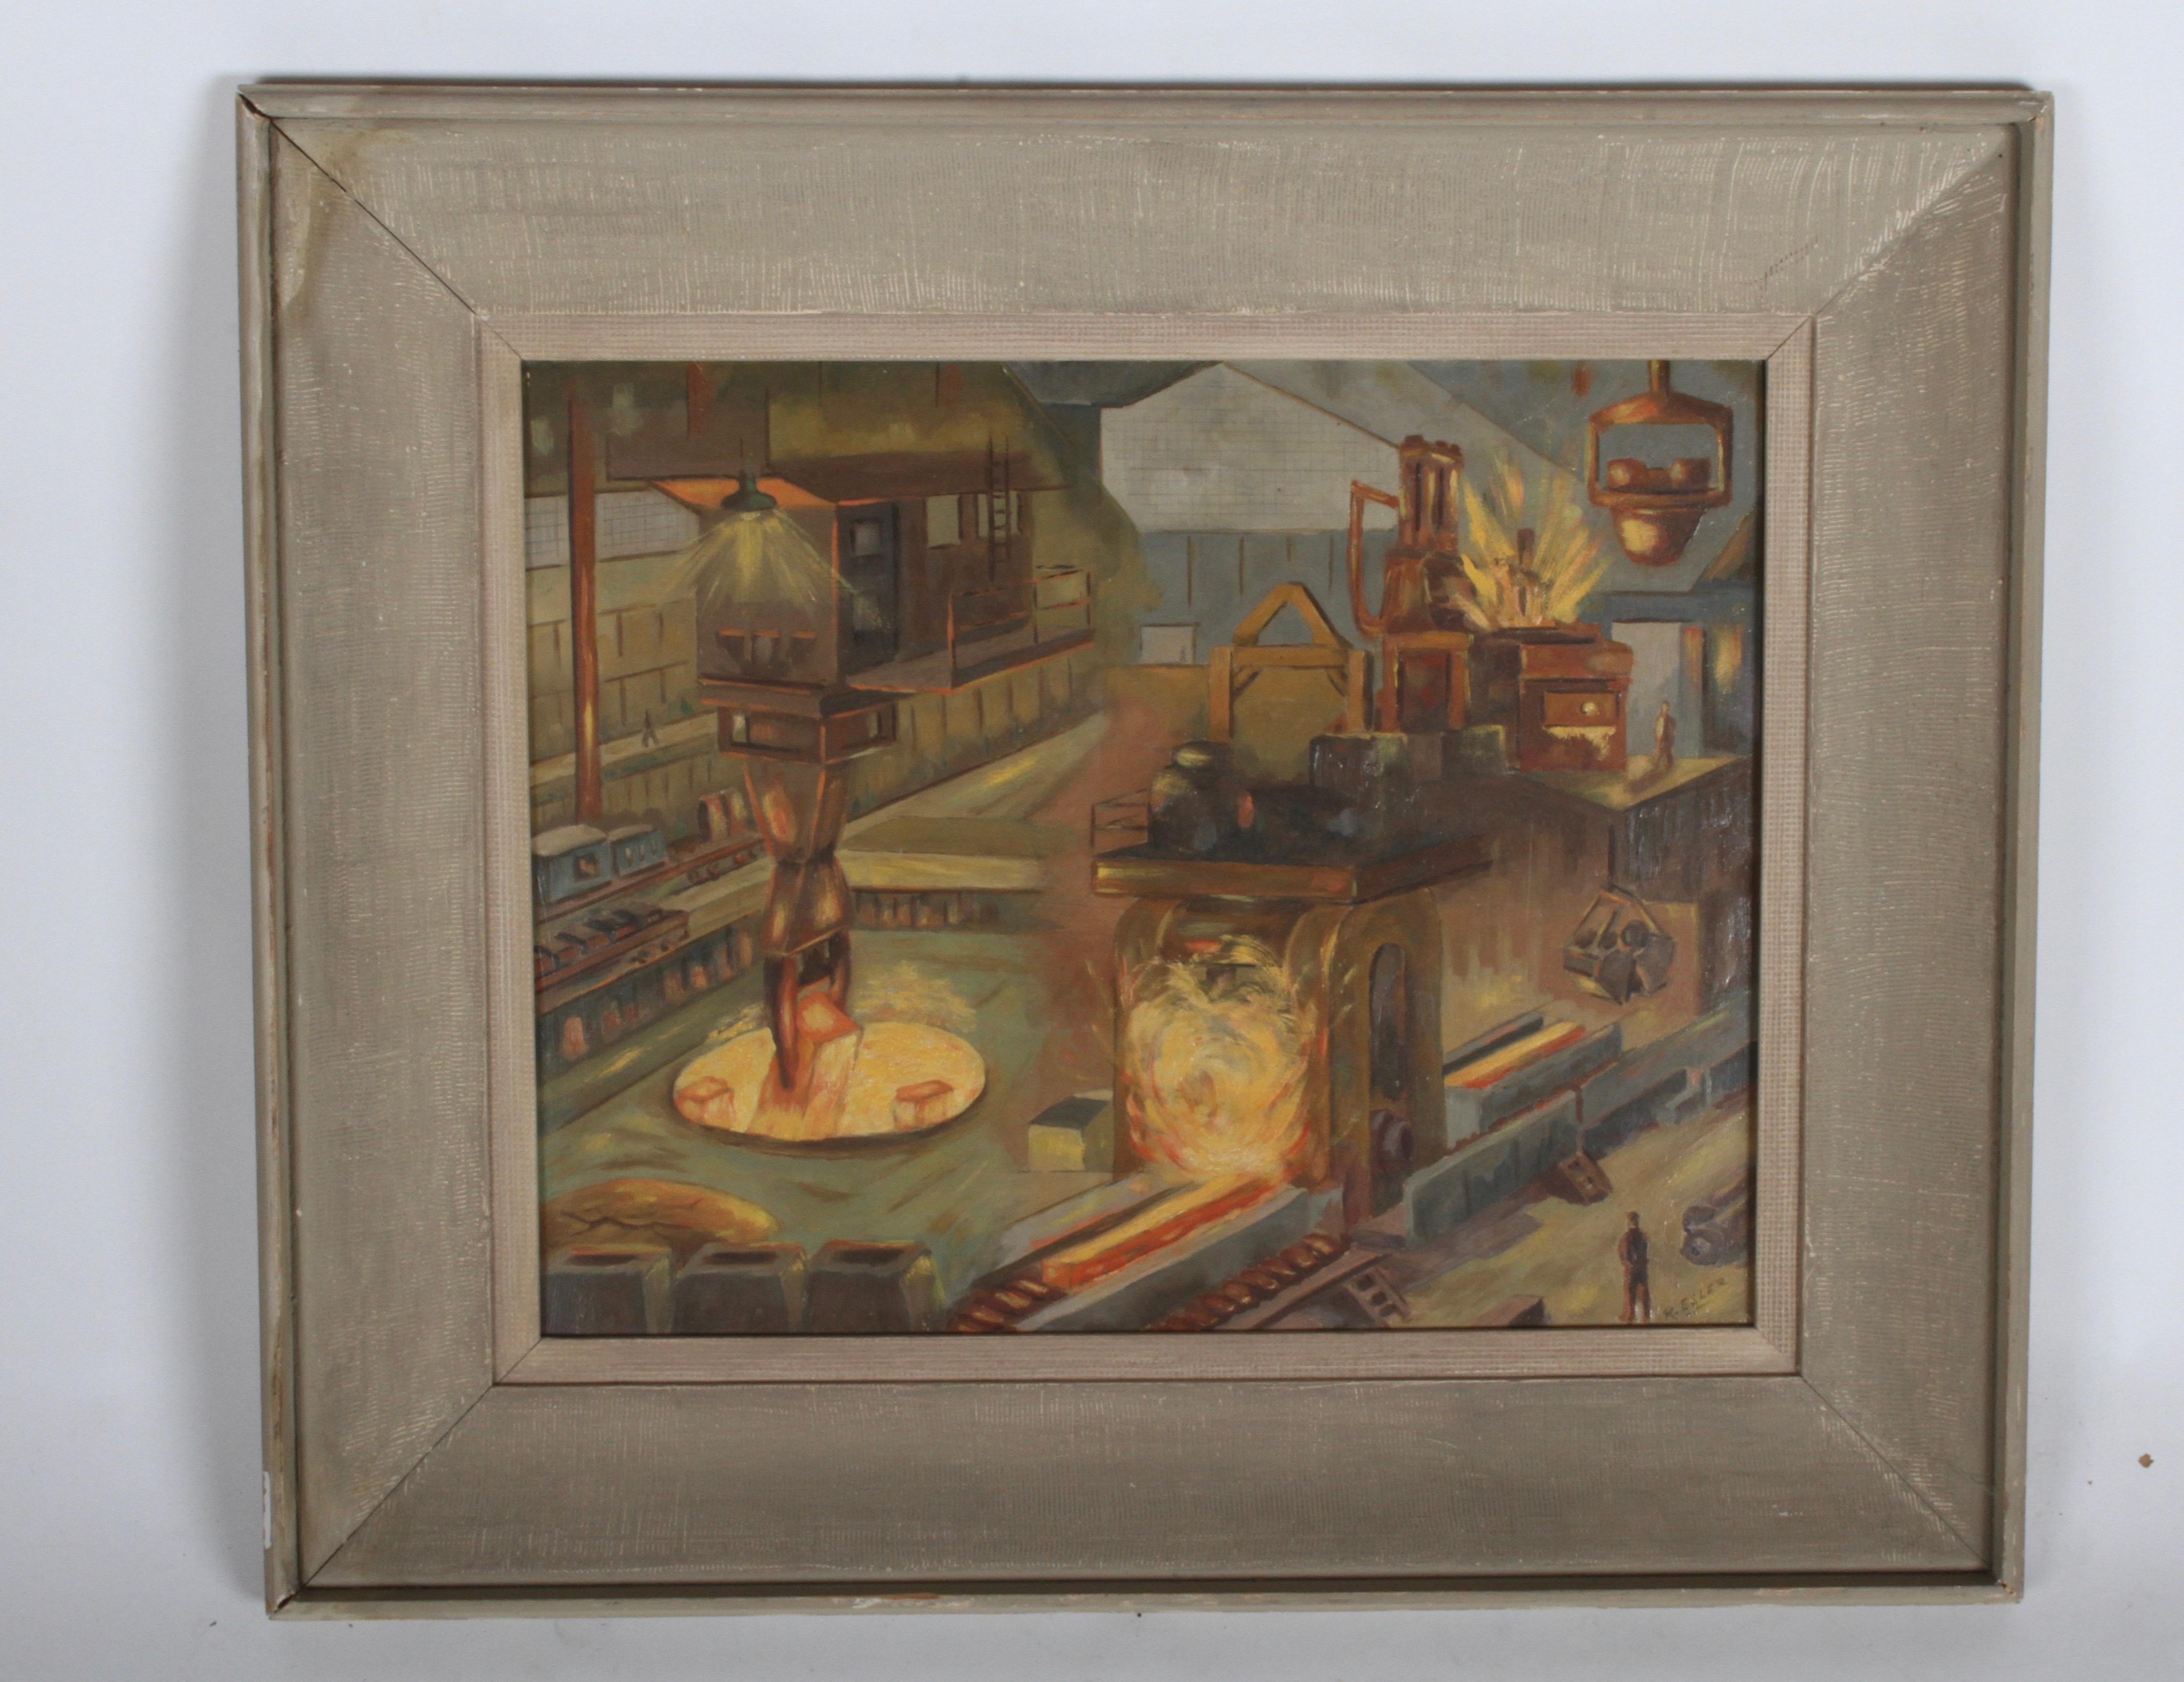 Signed 1940s WPA style Industrial oil painting of Allegheny Ludlum Corporation of Pennsylvania steel refinery blast furnace, architectural rendering depicting the interior layout with workers, cranes, molten steel, fire, conveyor belts, flat train